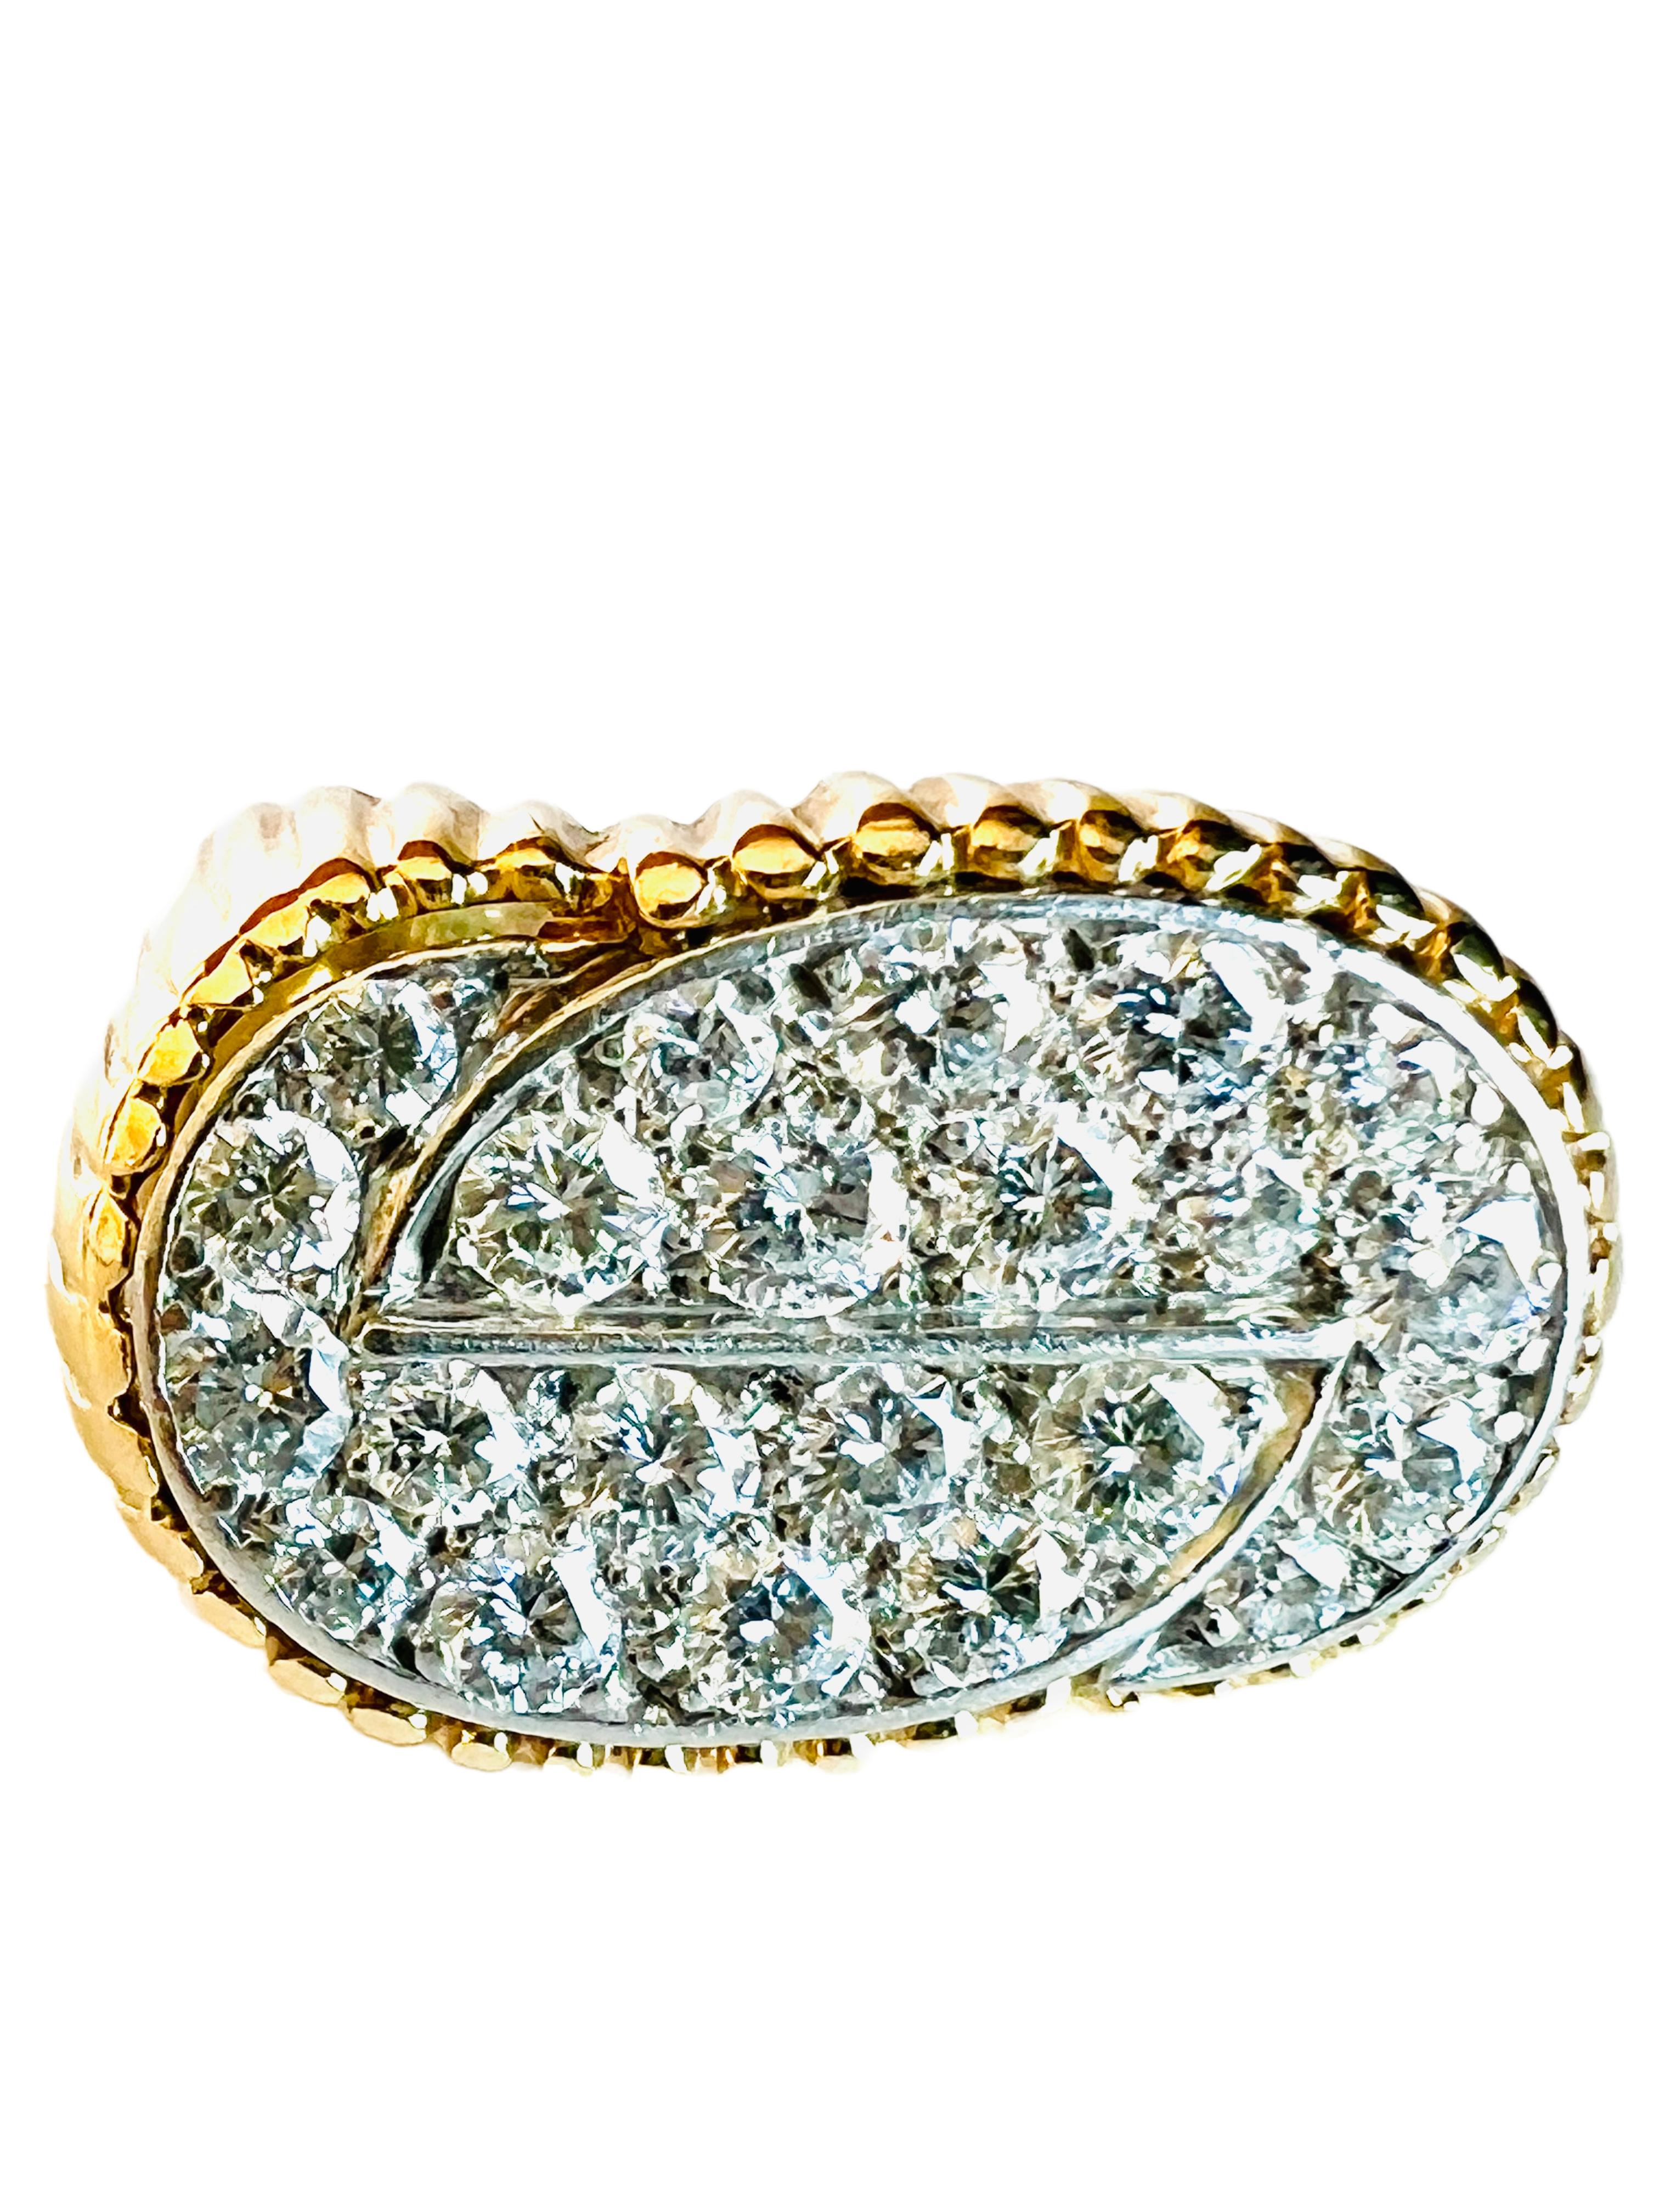 This elegant vintage ring is designed with two interlocking circular sections of pave diamonds set in platinum (top) and a ribbed pattern of 18k yellow gold for the shoulders and shank. 

This ring is very well-constructed with fine craftsmanship.